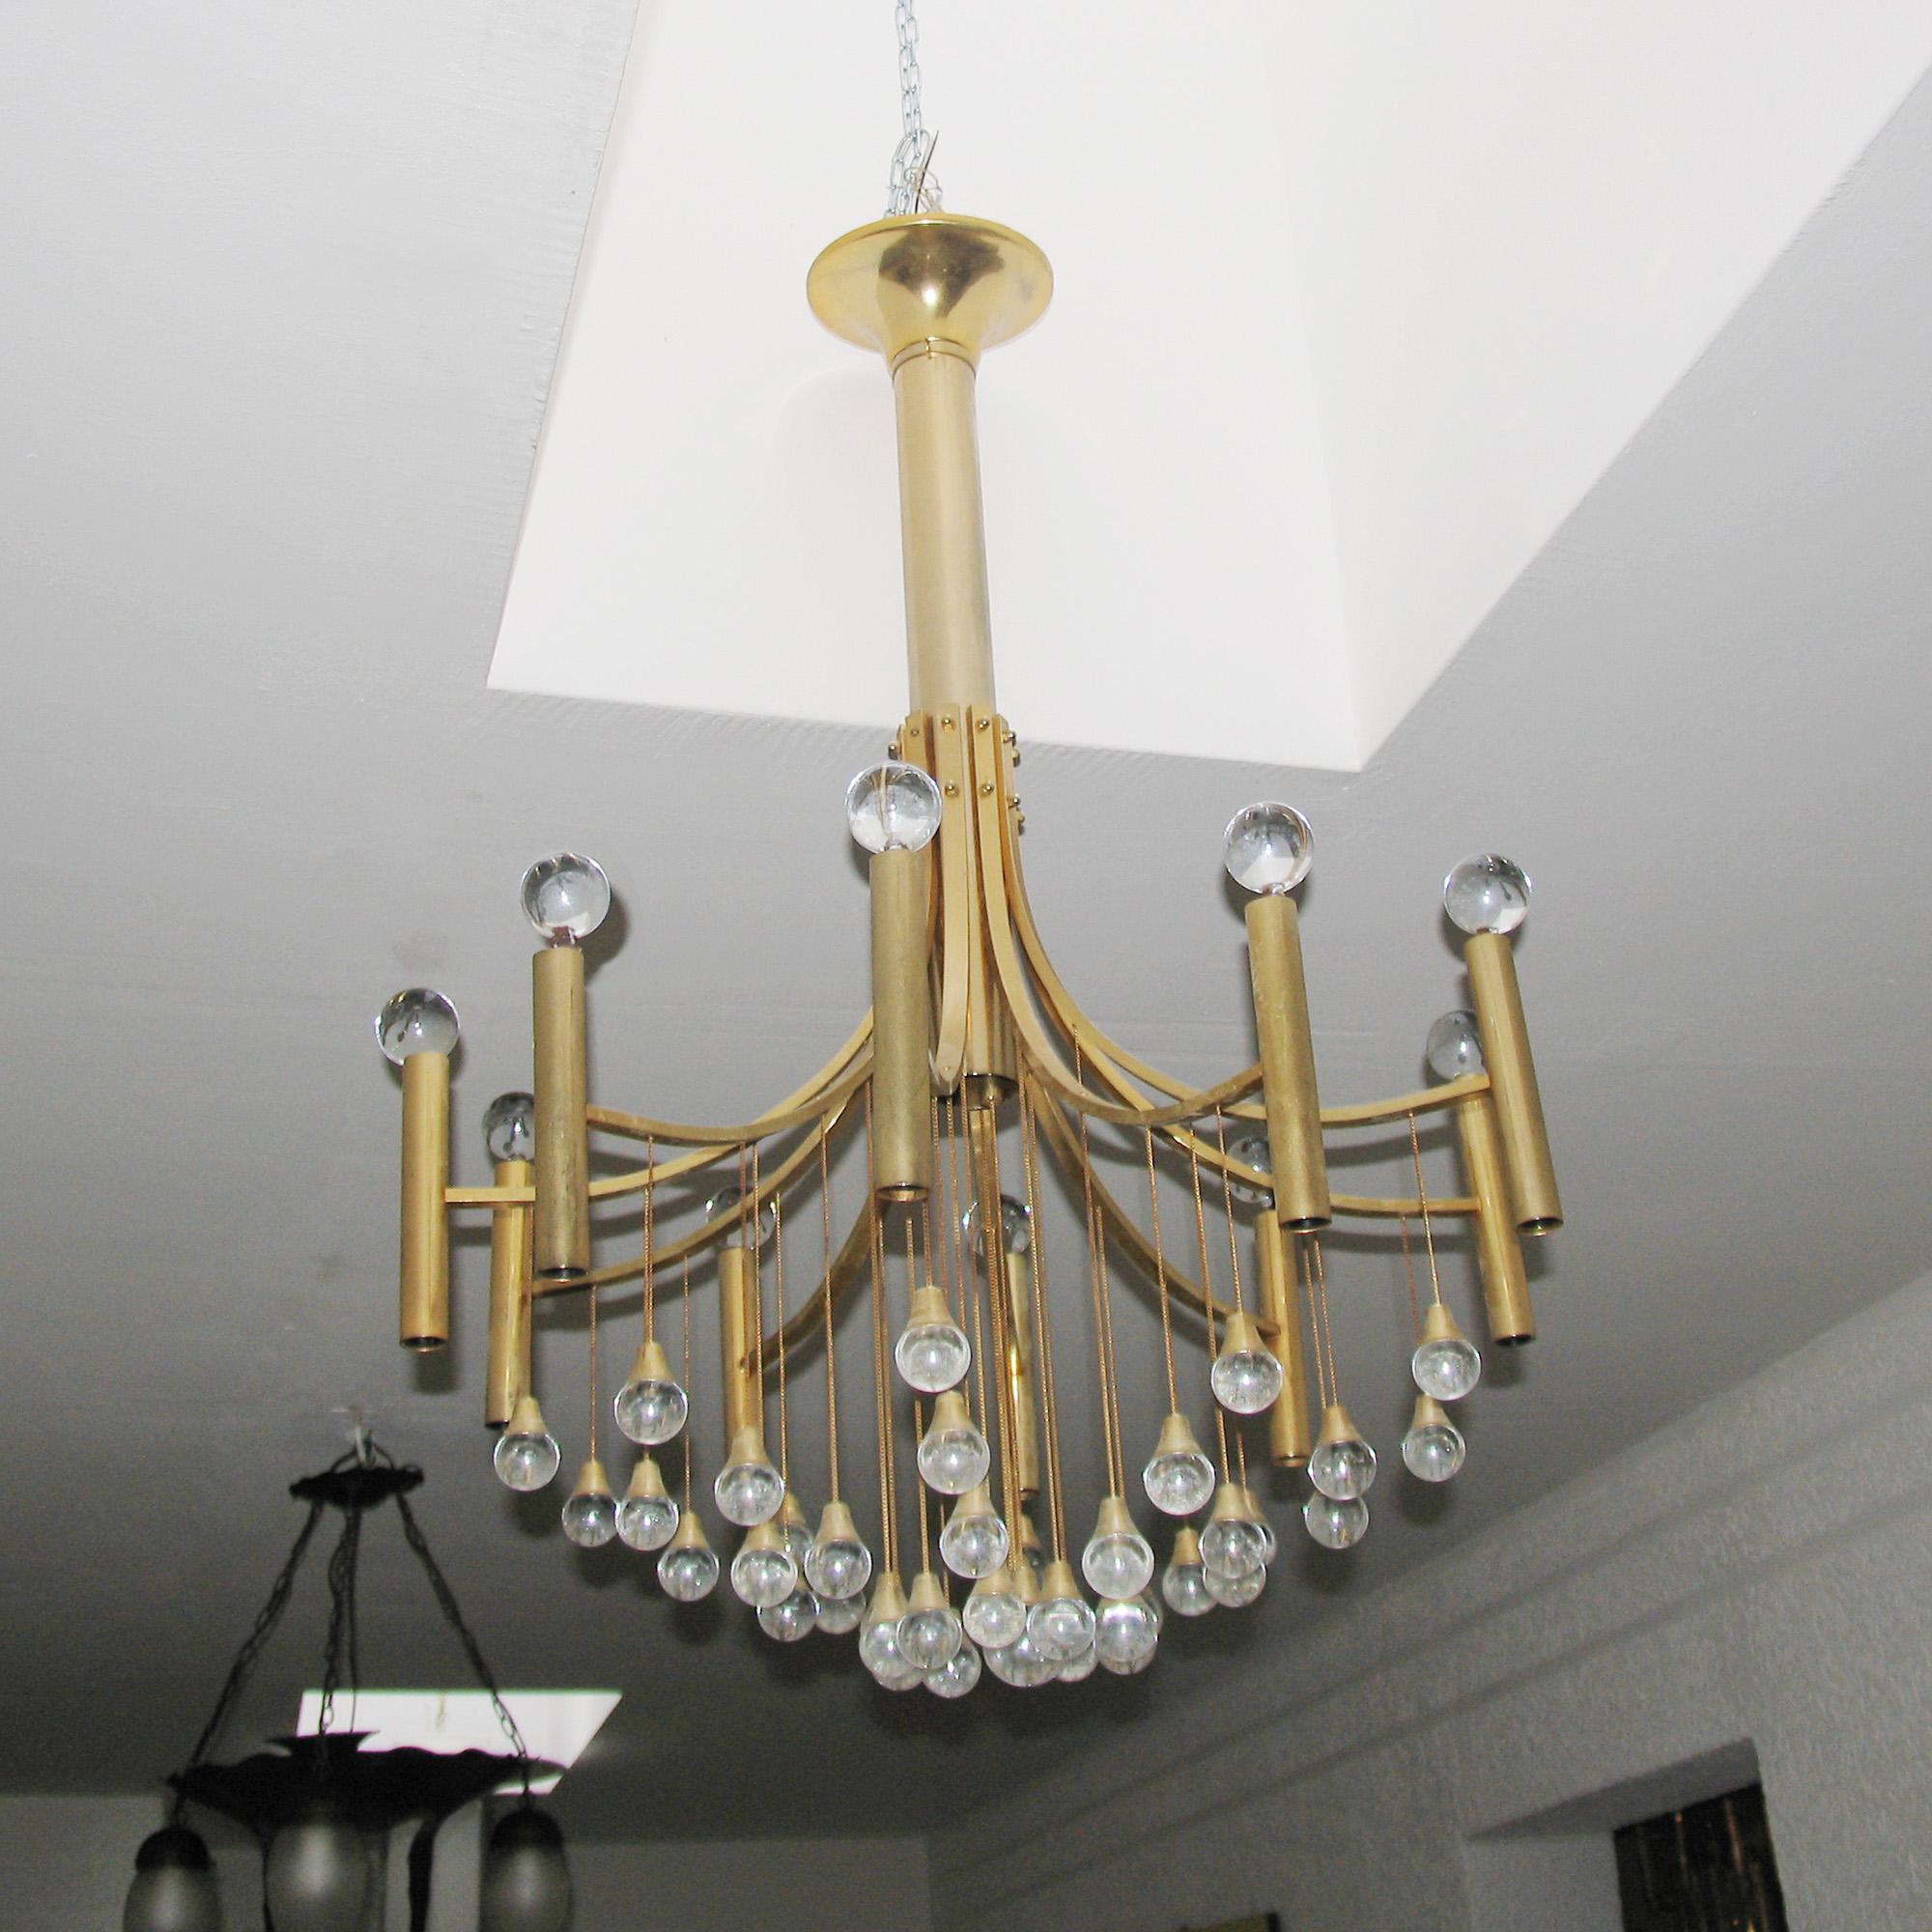 Italian Gaetano Sciolari Gold-Plated Chandelier with Crystal Spheres For Sale